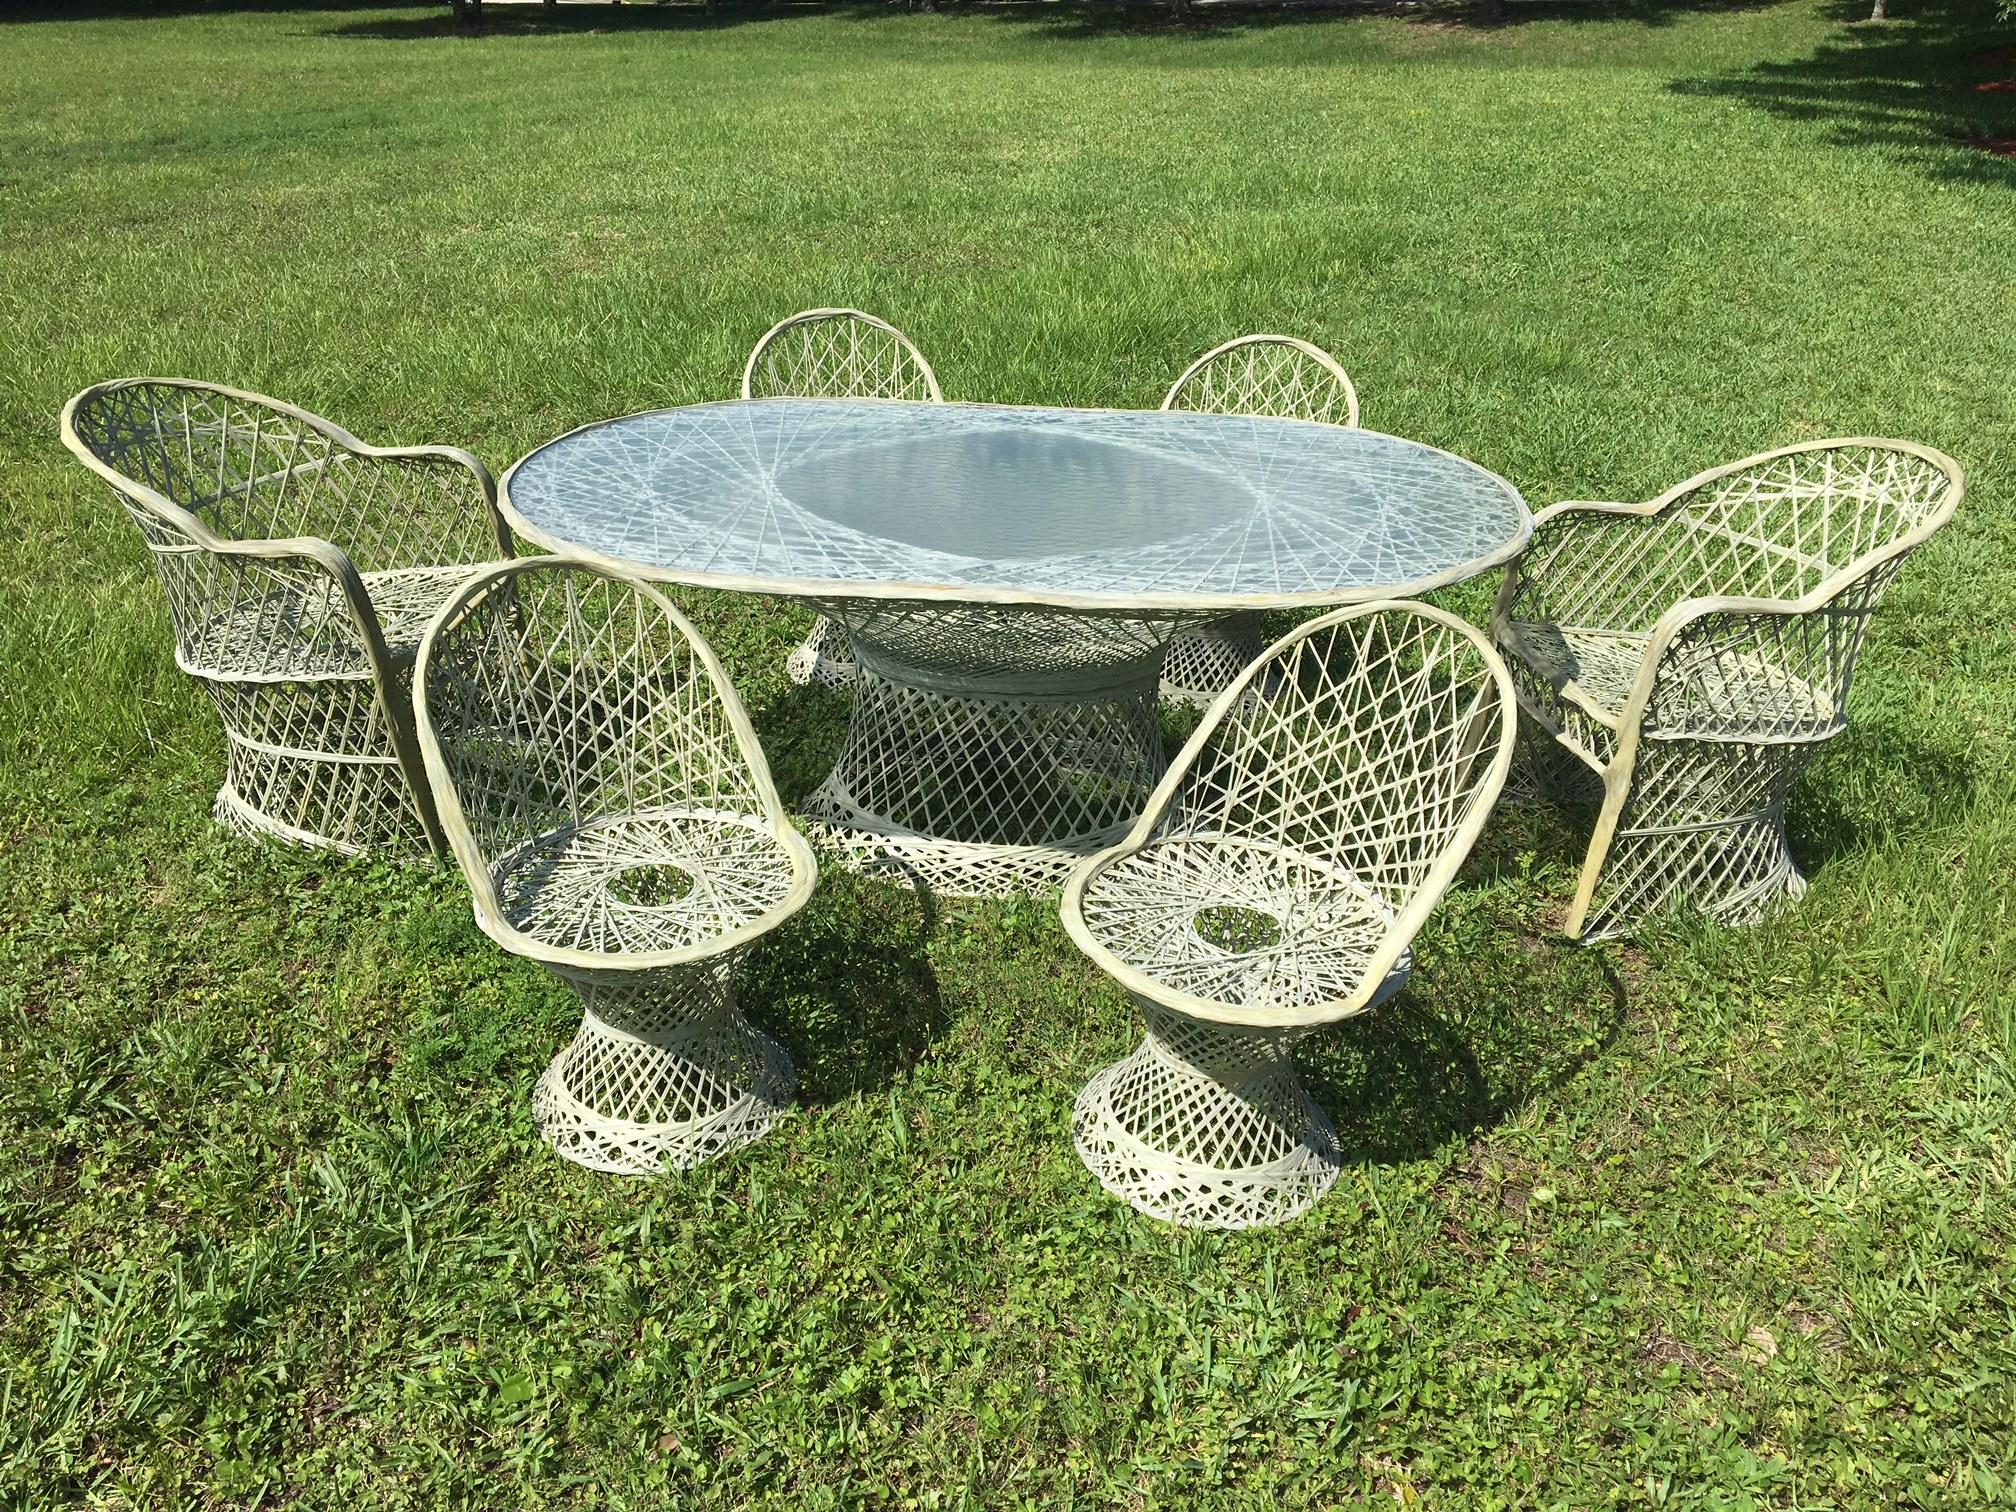 Midcentury spun fiberglass dining set by Russell Woodard in rare light green color. Features two armchairs, four side chairs, and large oval table with original glass top. Good vintage condition with slight discoloration consistent with age (see